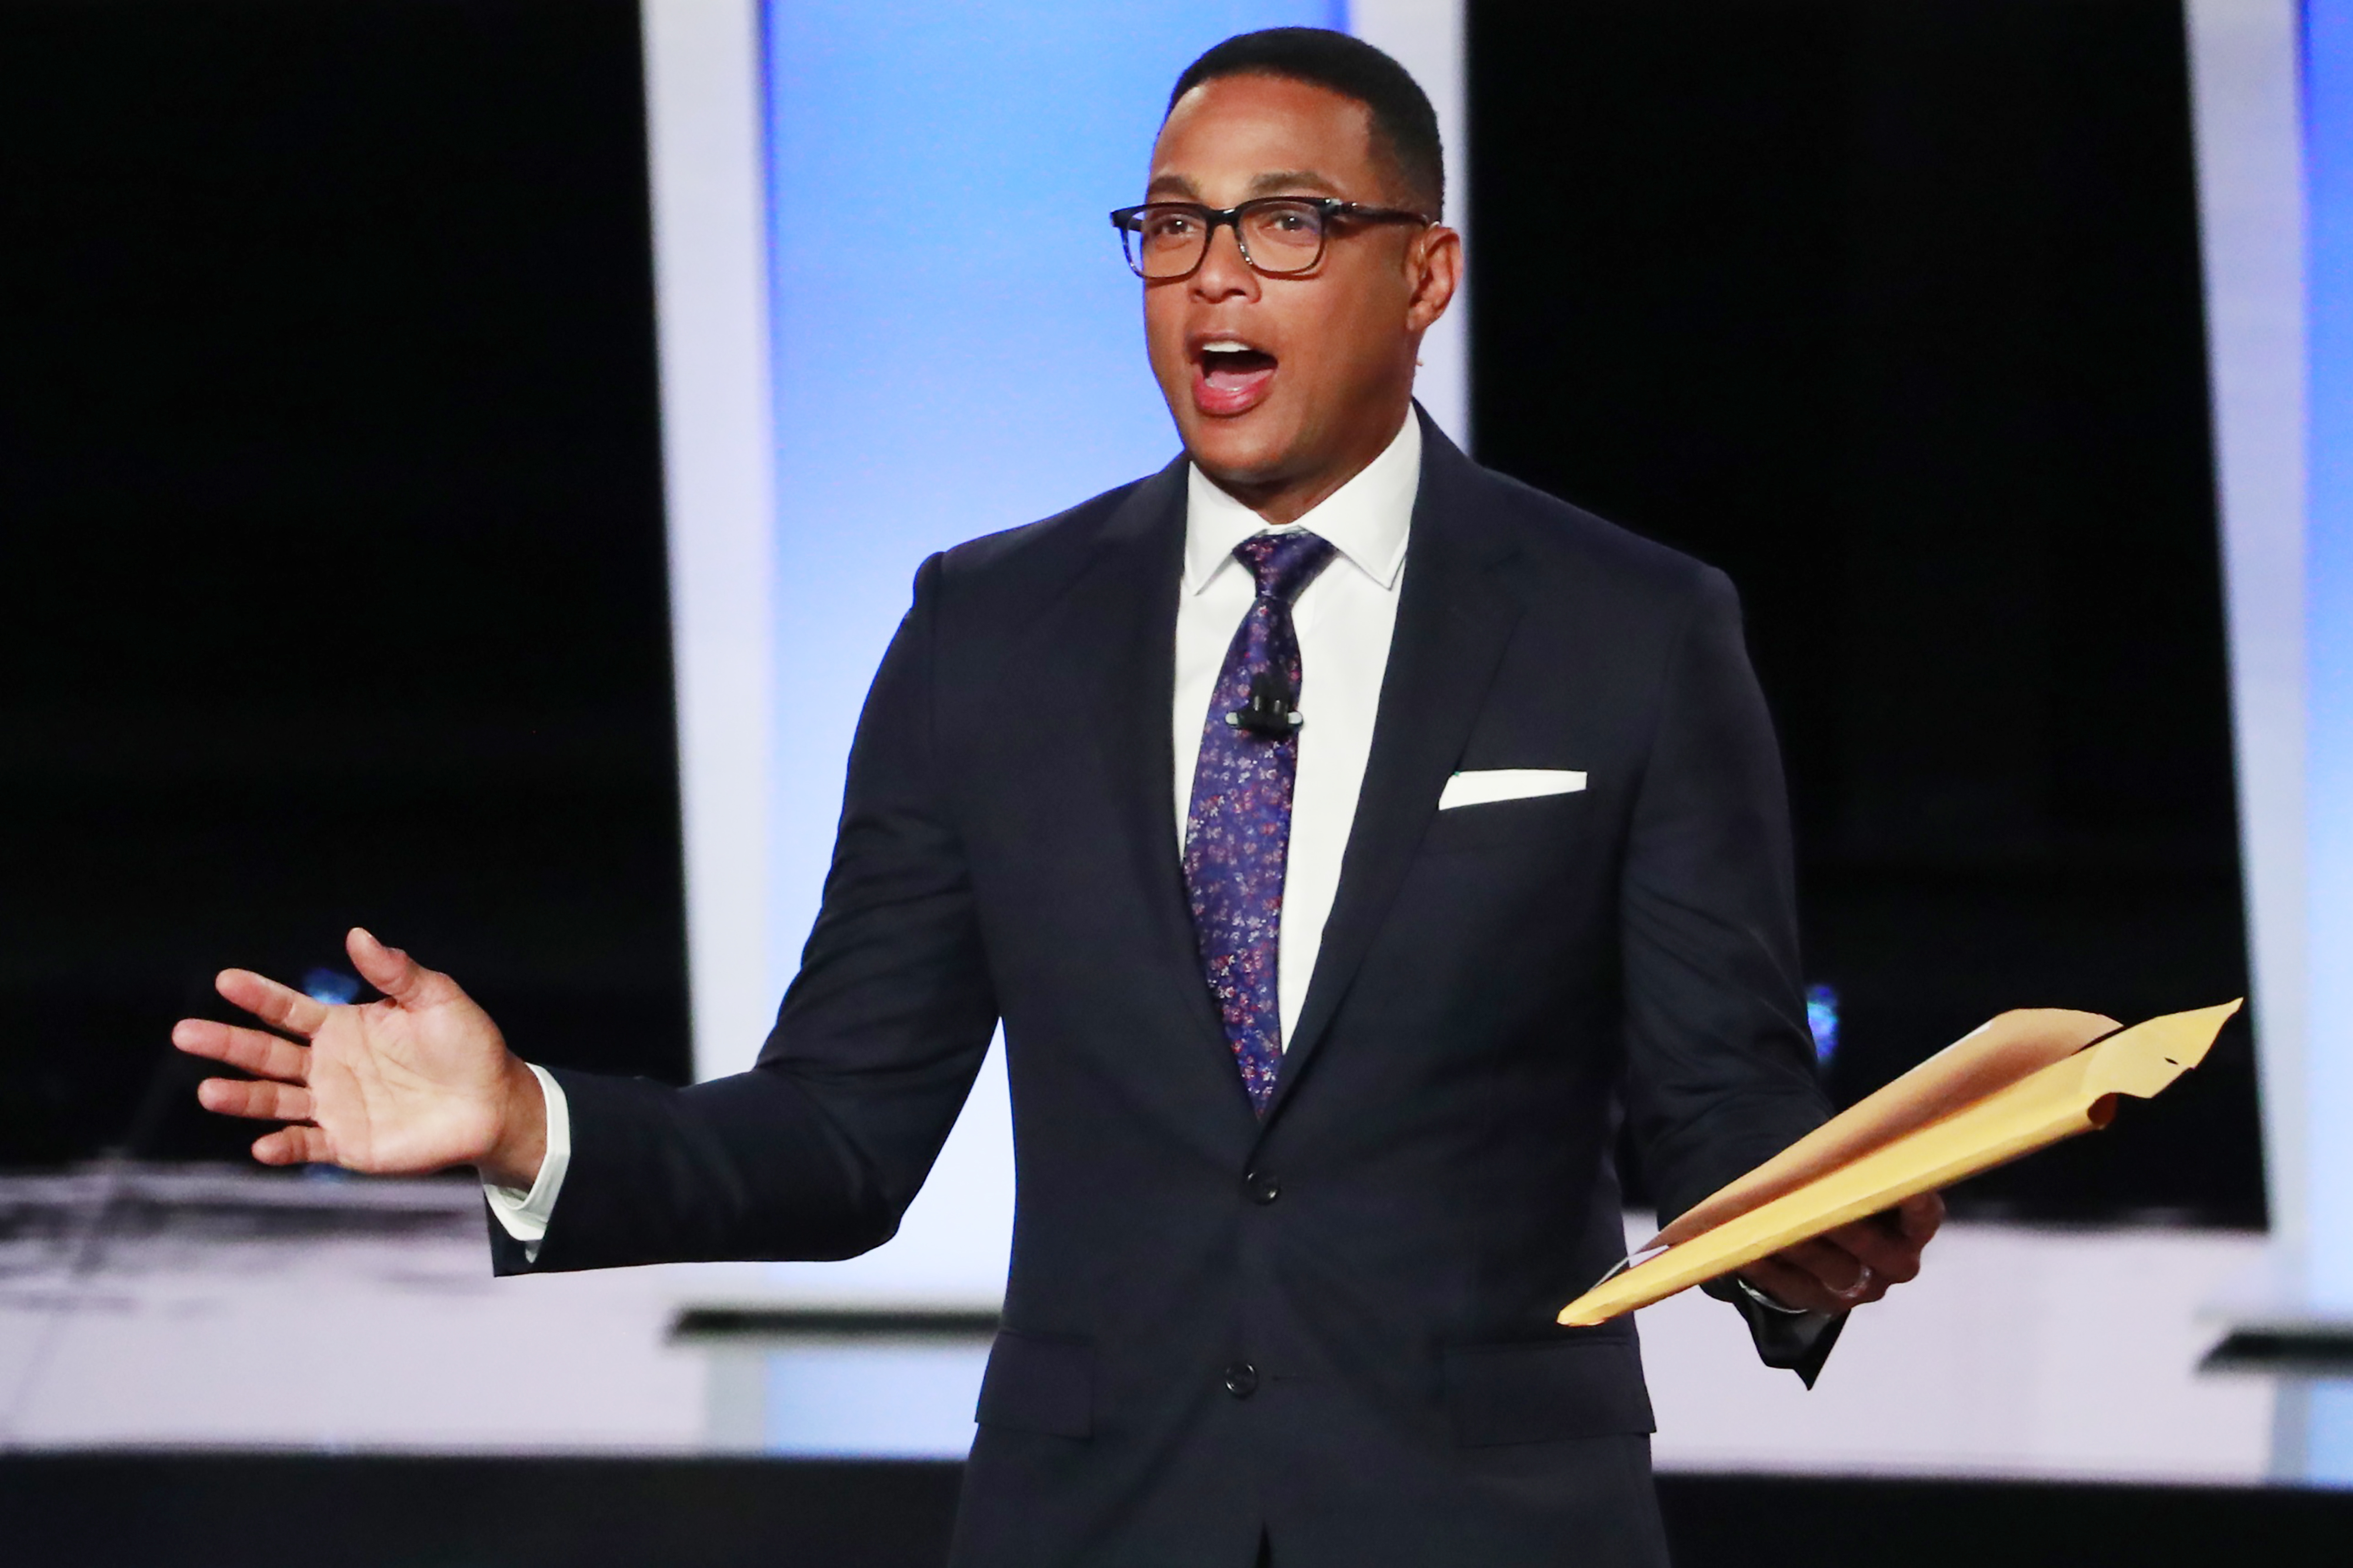 Moderator Don Lemon of CNN speaks to the audience before the start of the second night of the second 2020 Democratic U.S. presidential debate in Detroit, Michigan, July 31, 2019. (REUTERS/Lucas Jackson)